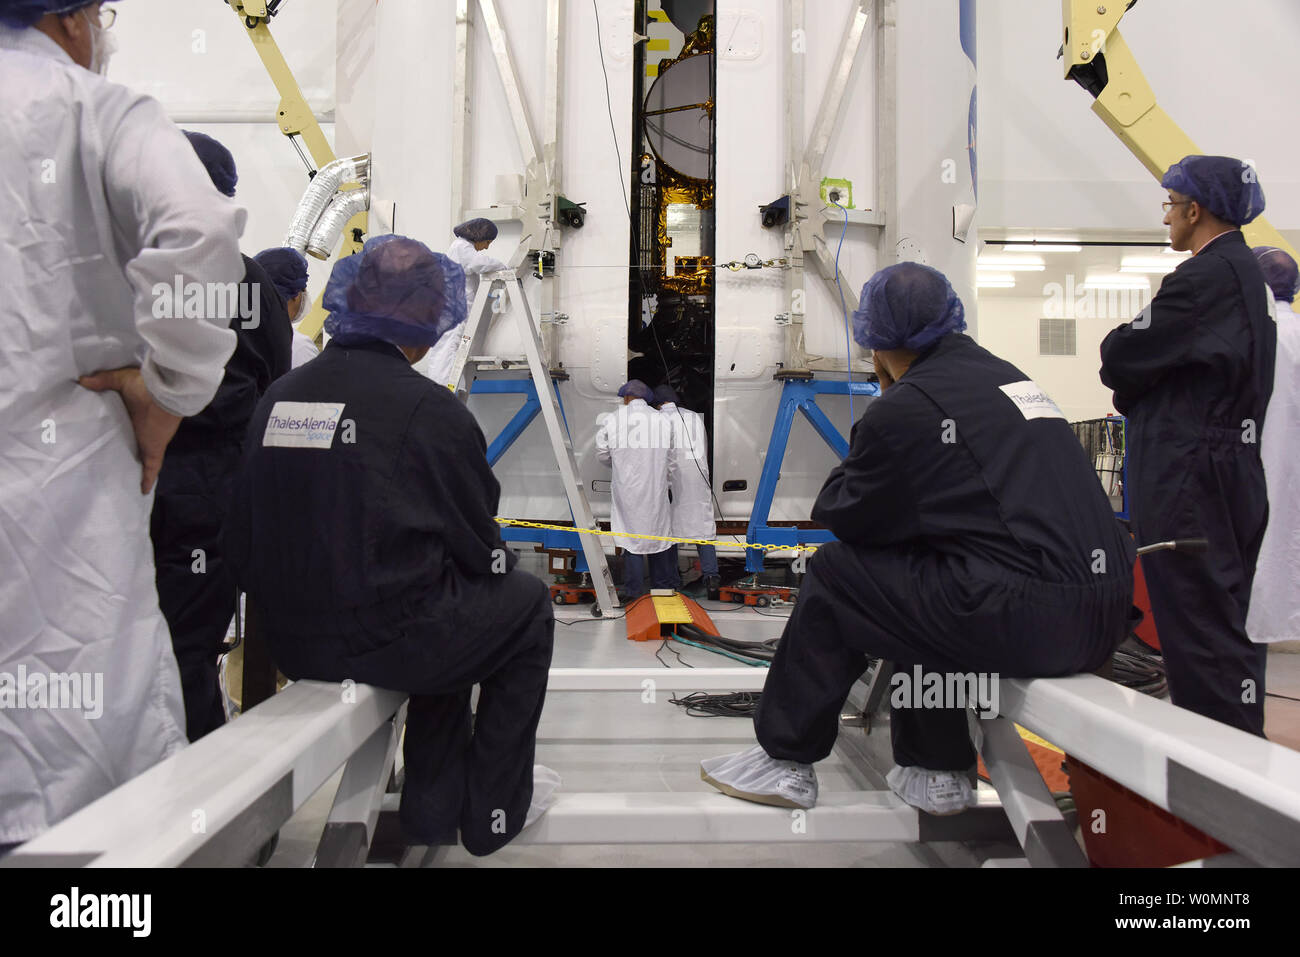 In the SpaceX Payload Processing Facility at Vandenberg Air Force Base on January 11, 2016, the Jason-3 satellite is prepared for encapsulation in its payload faring. Once the encapsulating is complete, it will be mated to a SpaceX Falcon 9 rocket at Vandenberg's Space Launch Complex 4. Jason-3, an international mission led by the National Oceanic and Atmospheric Administration (NOAA), will help continue U.S.-European satellite measurements of global ocean height changes.    NASA/UPI Stock Photo